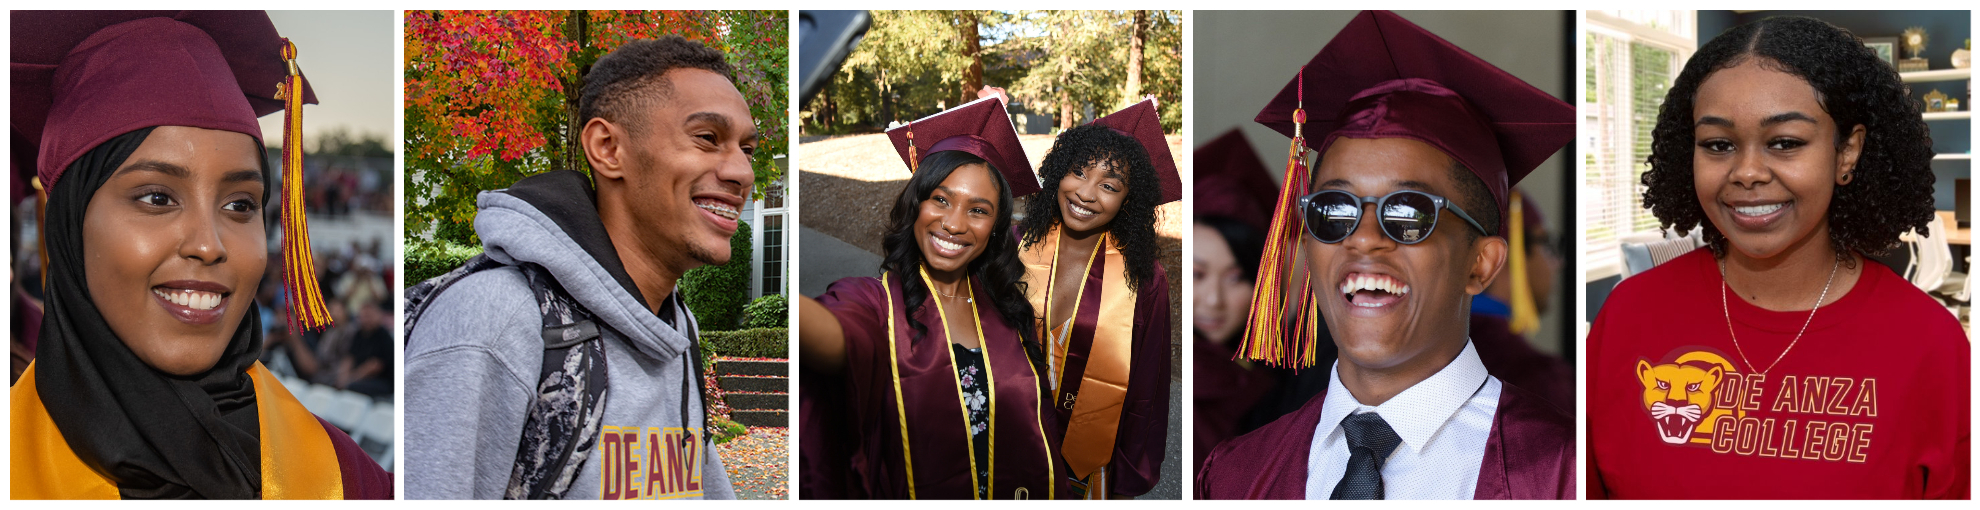 photo vignettes of students and graduates